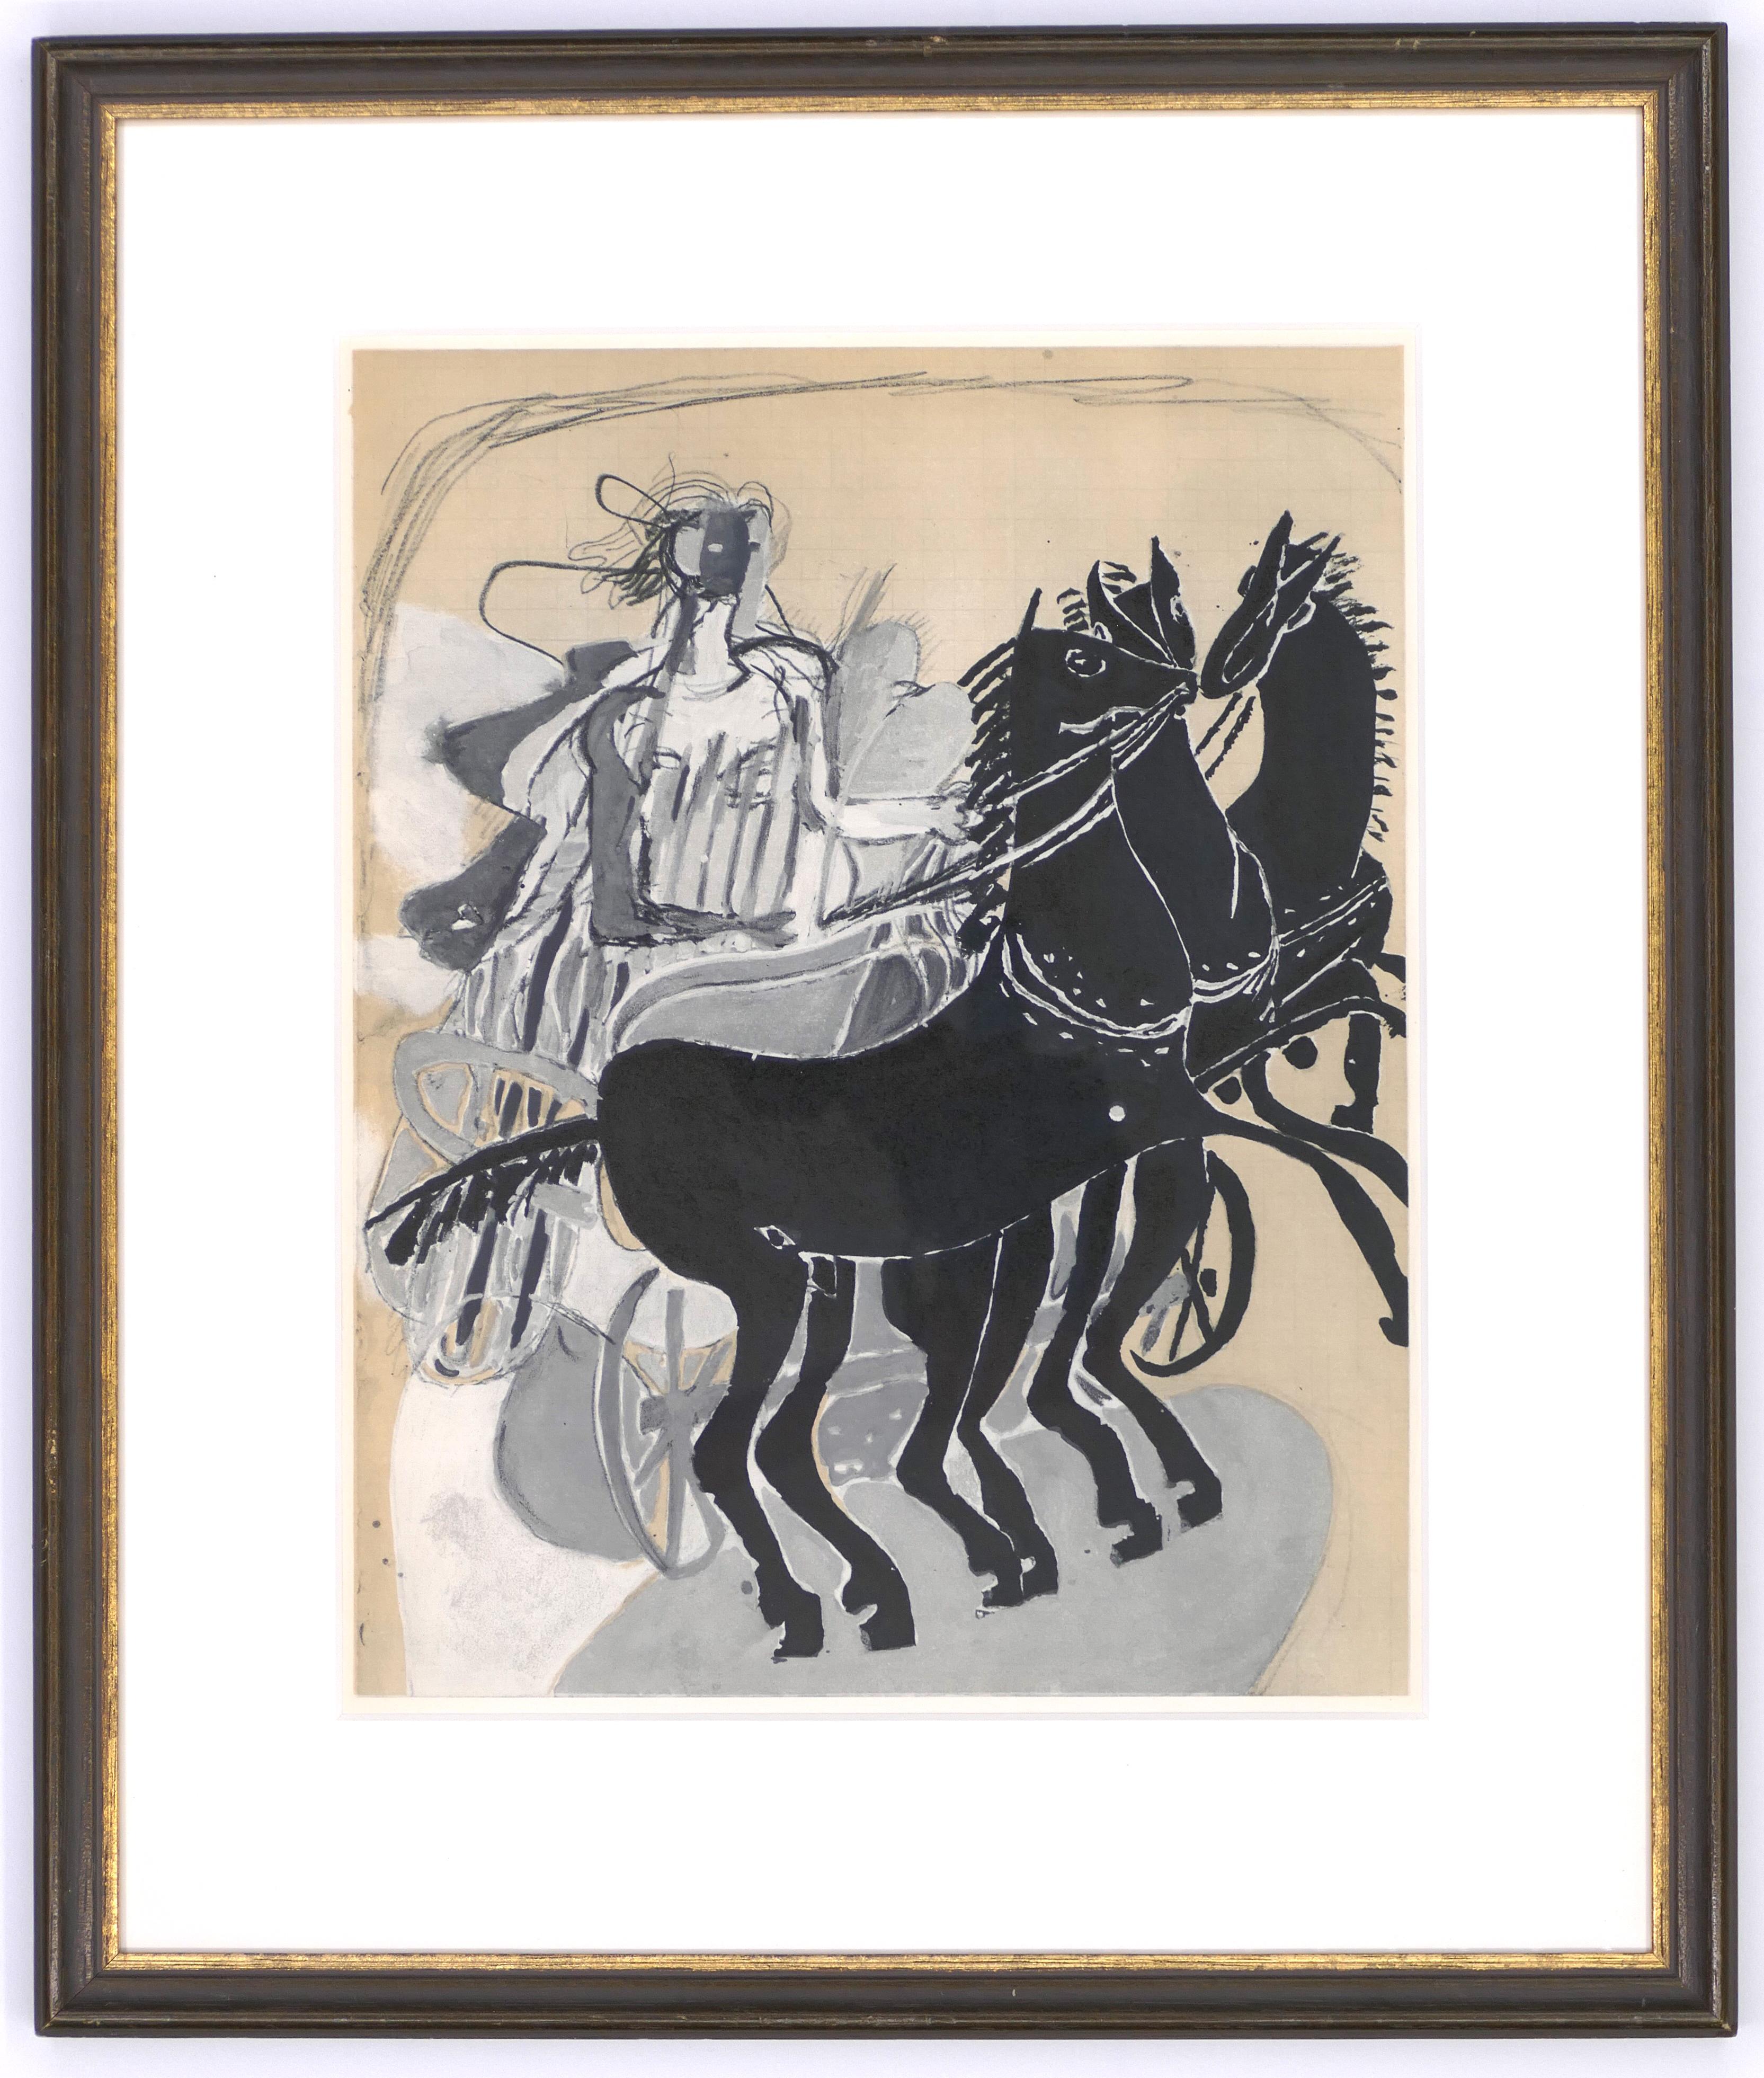 The Chariot - Original Lithograph by Georges Braque - 1955 1